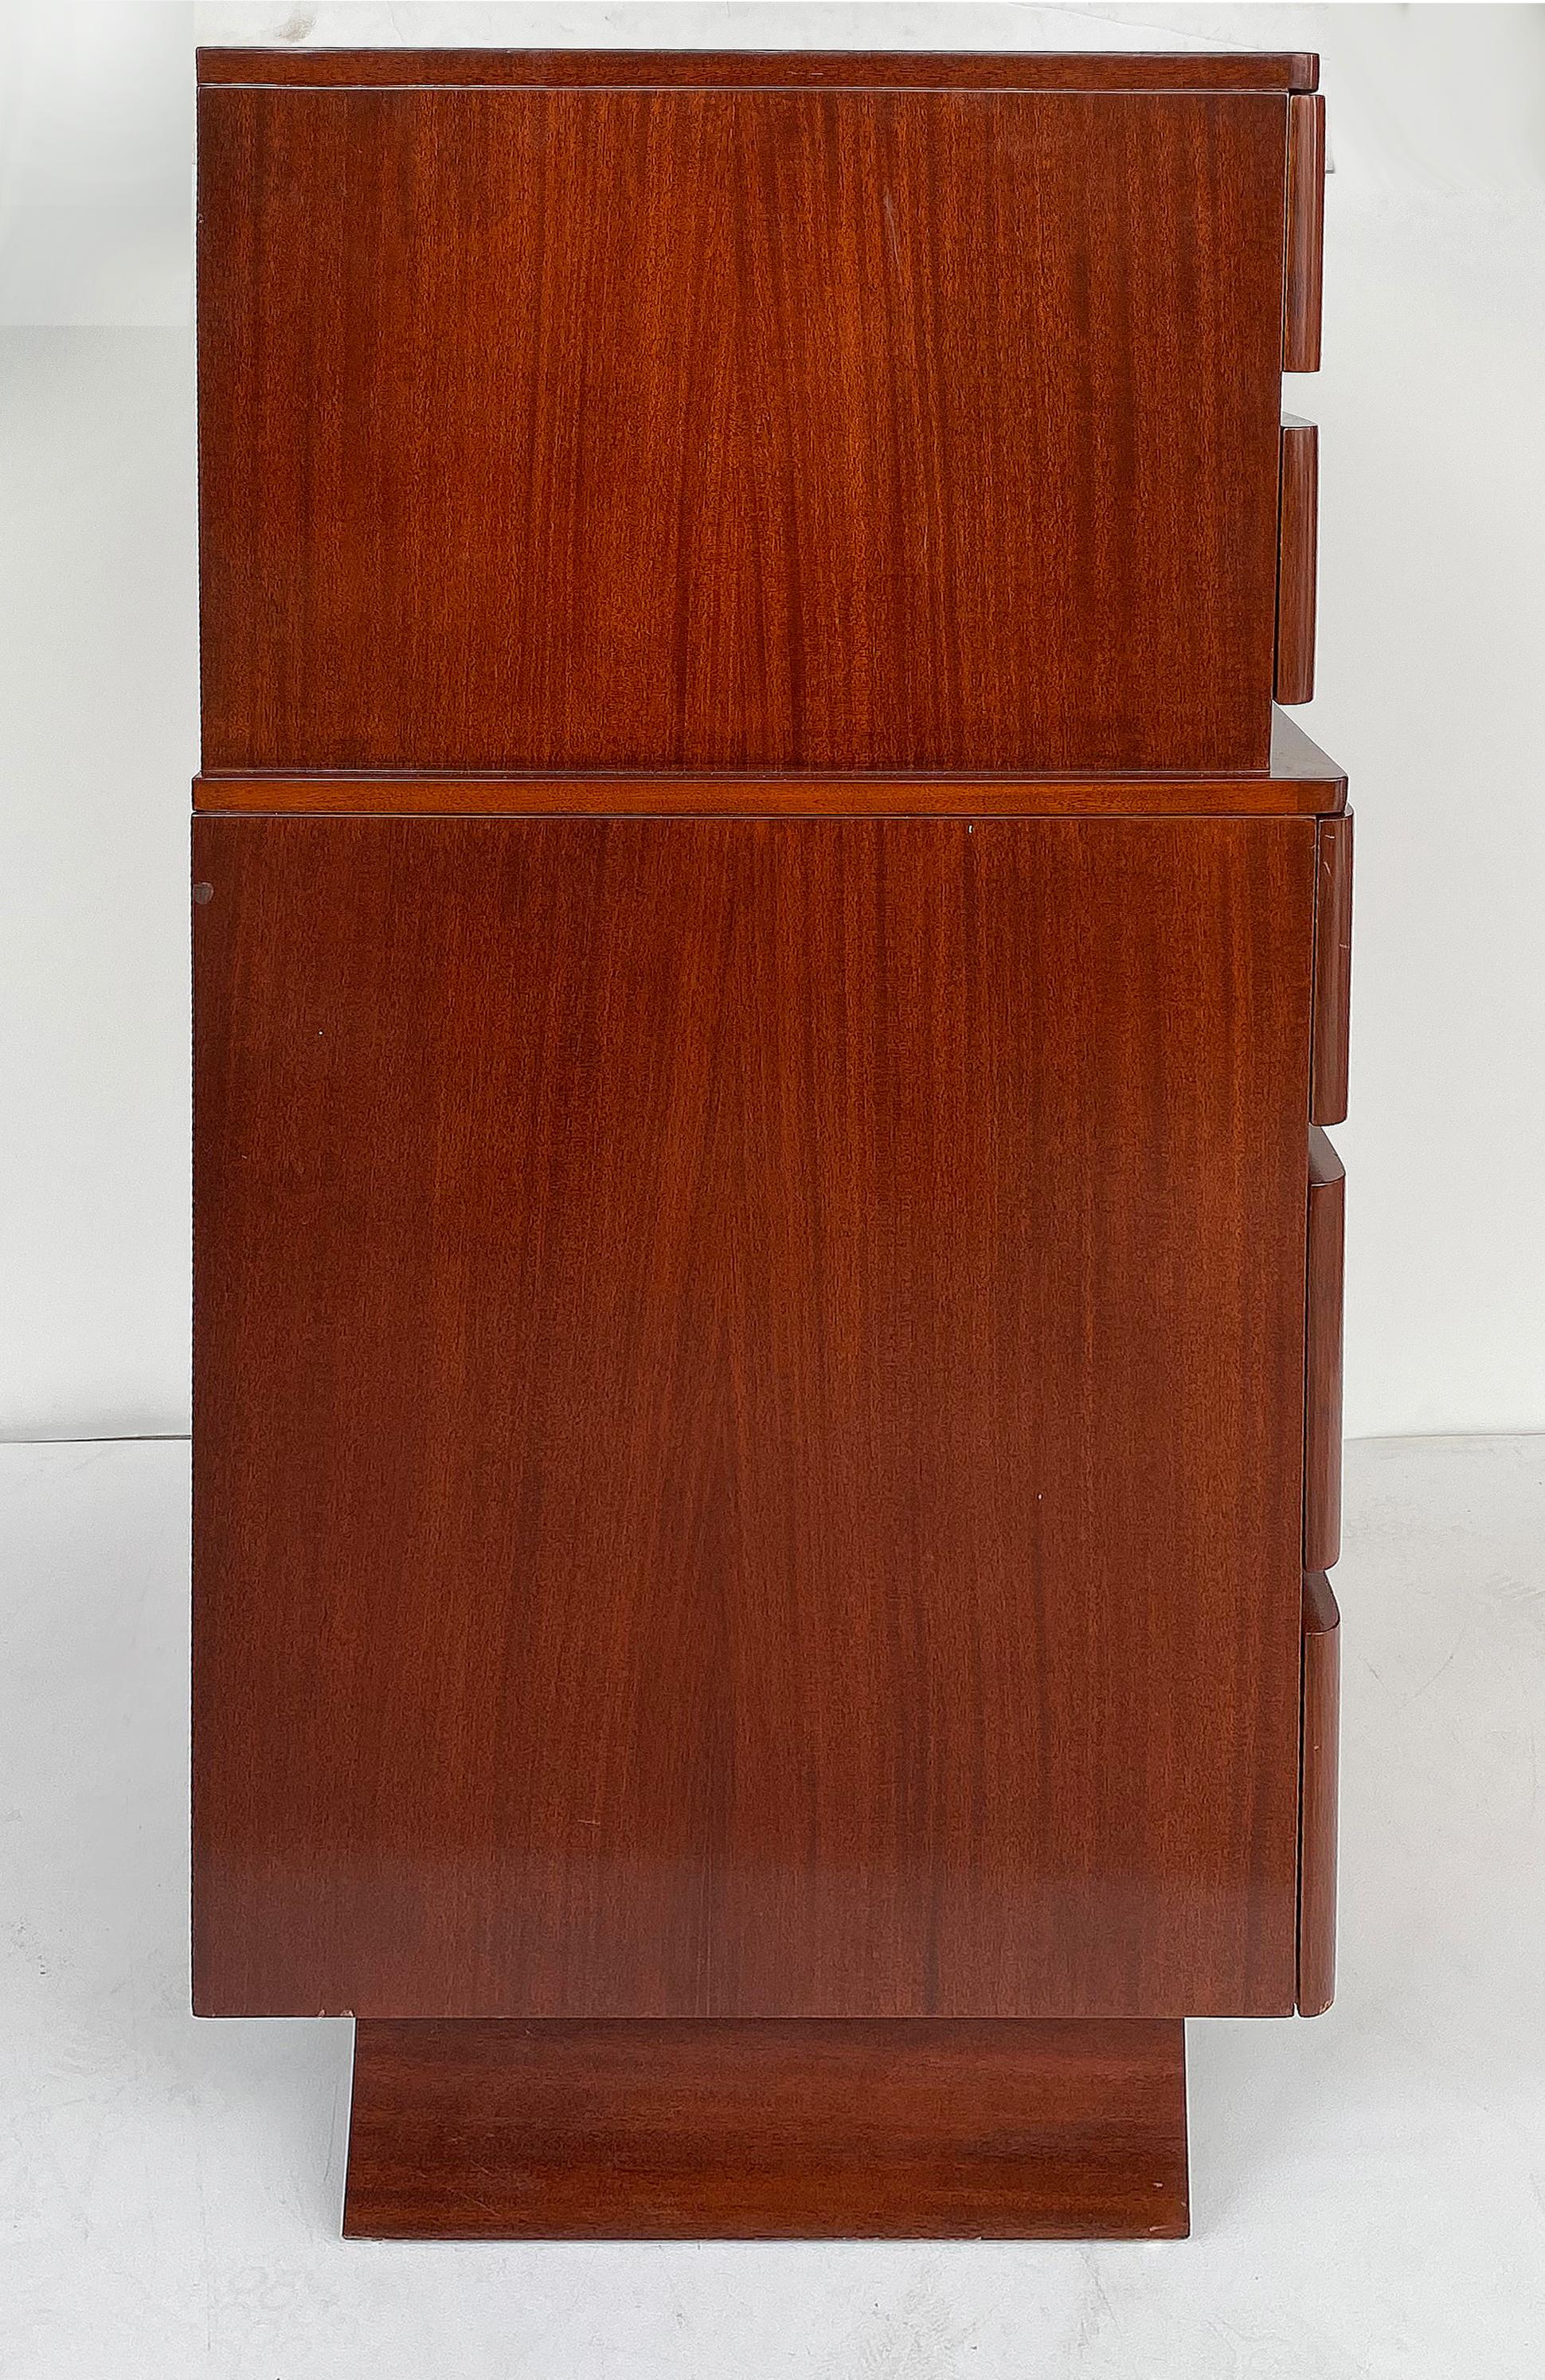 Offered for sale is an American Mid-Century Modern tall chest of drawers manufactured by RWAY Furniture Co. c1965. This stylish chest is mahogany and bird's eye maple. The chest with its five drawers sits on splayed tapering feet and has the RWAY in